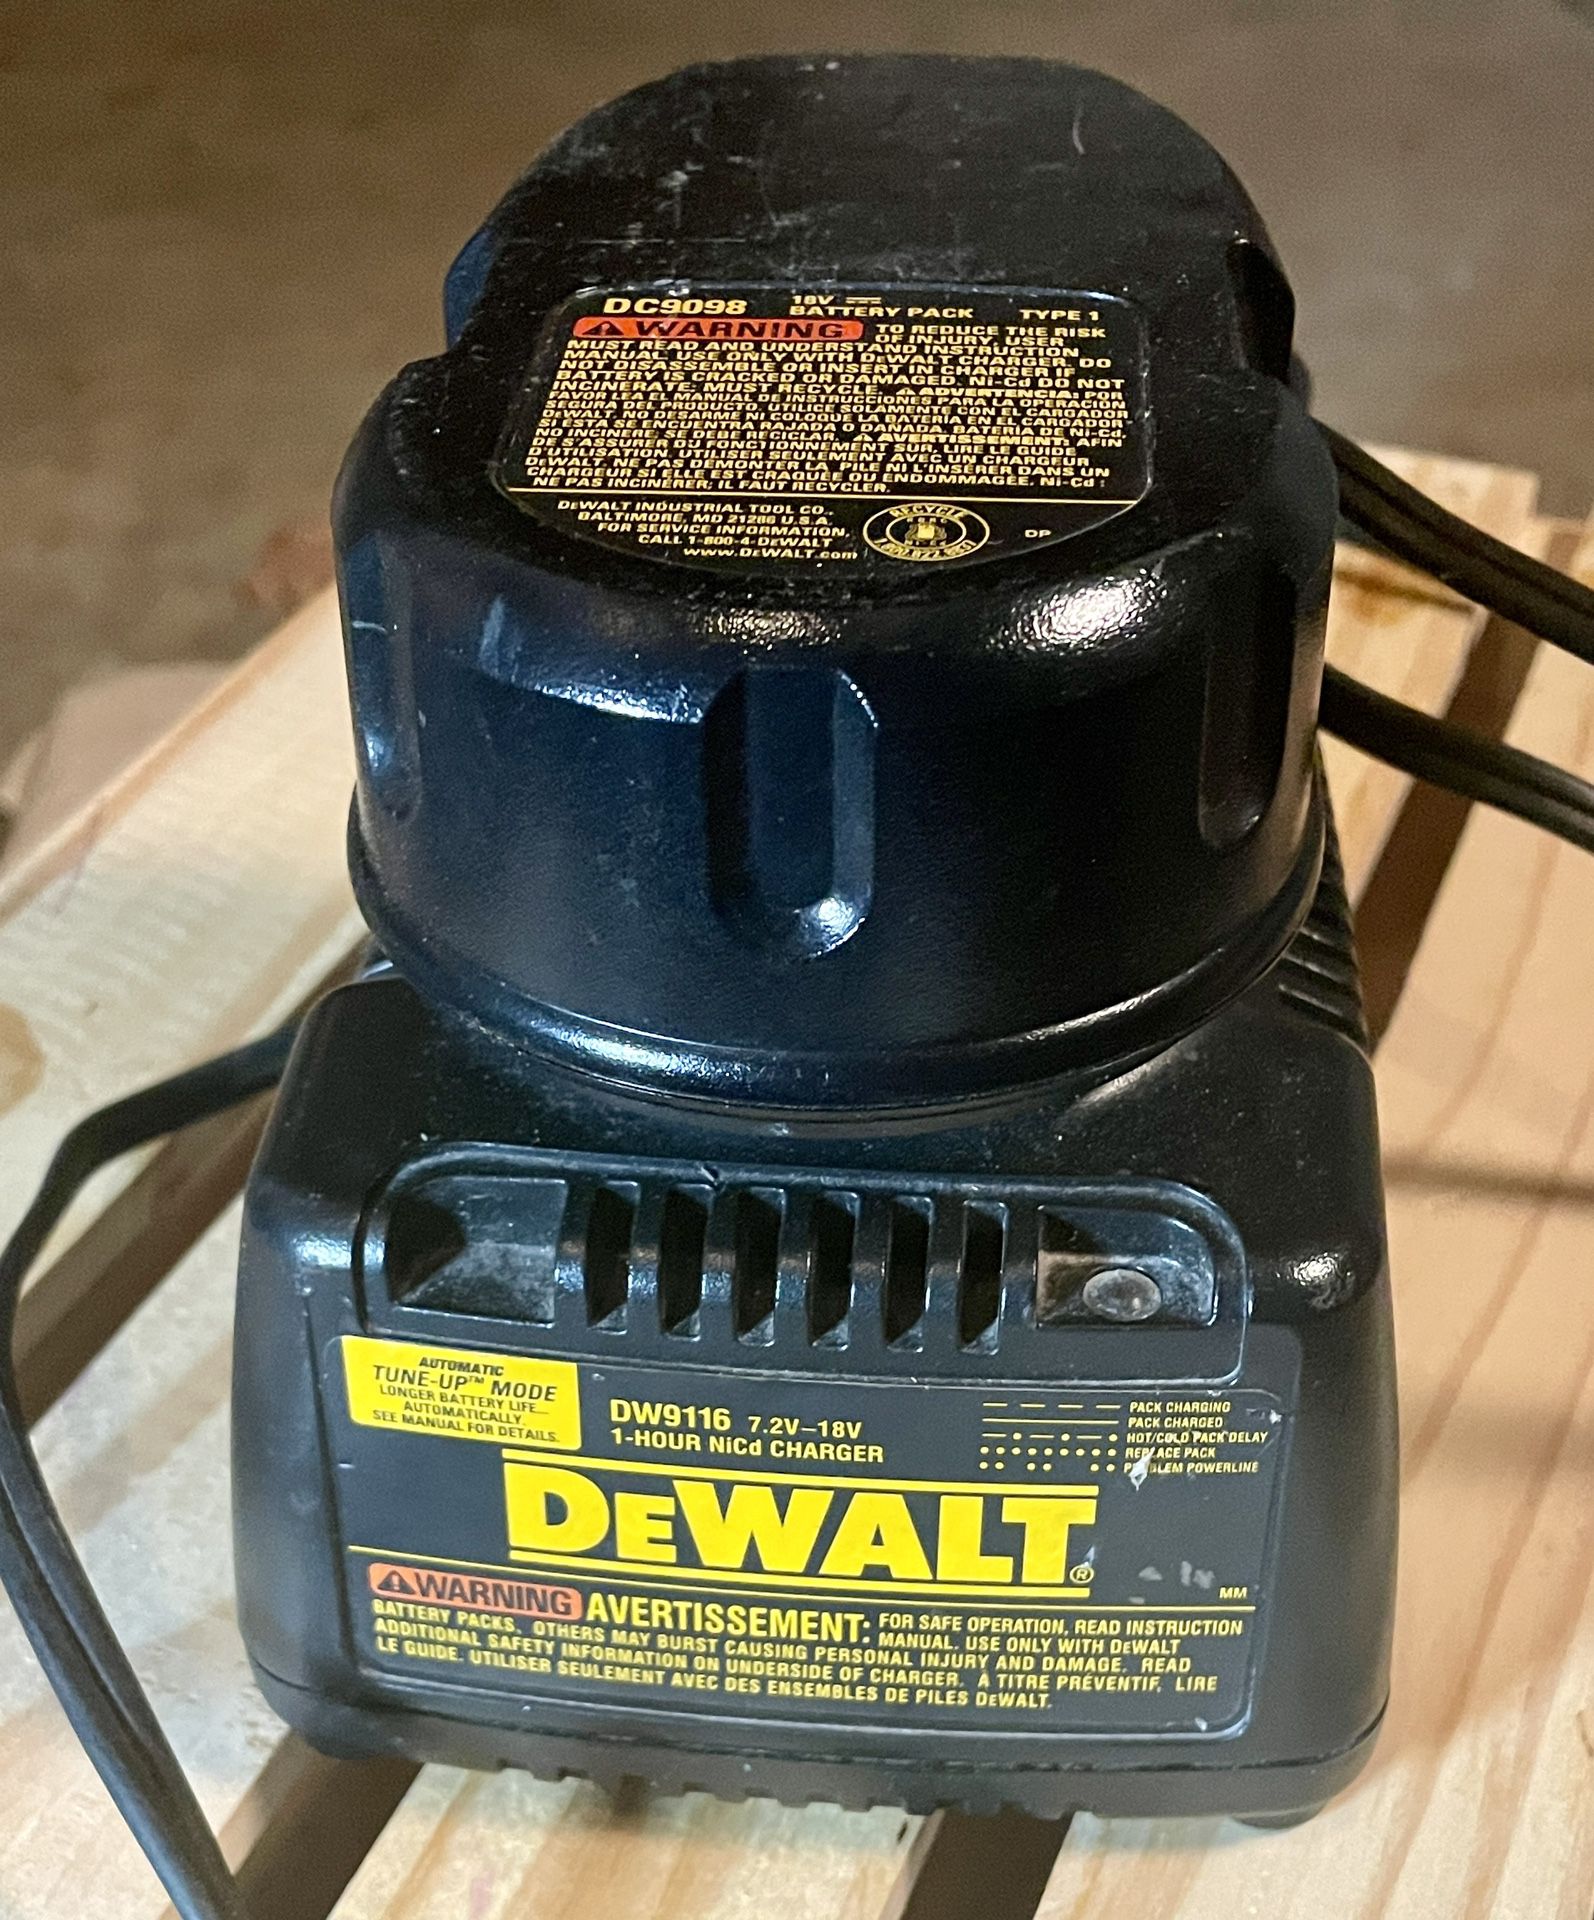 DeWalt DW9116 One Hour NiCd Charger With DC 9098 18V Battery Pack